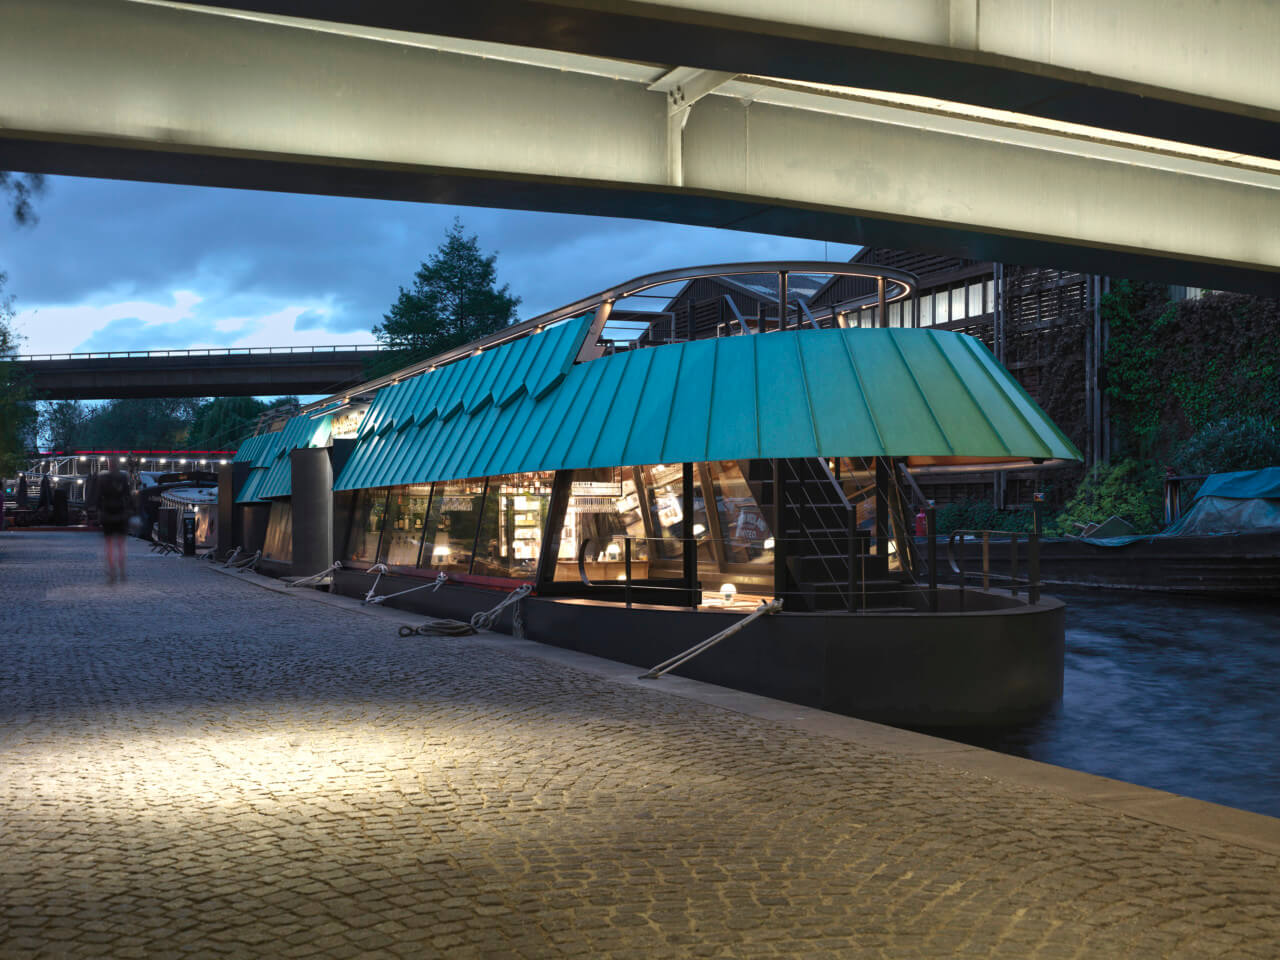 a barge-restaurant with a patinated roof as seen beneath a bridge at night